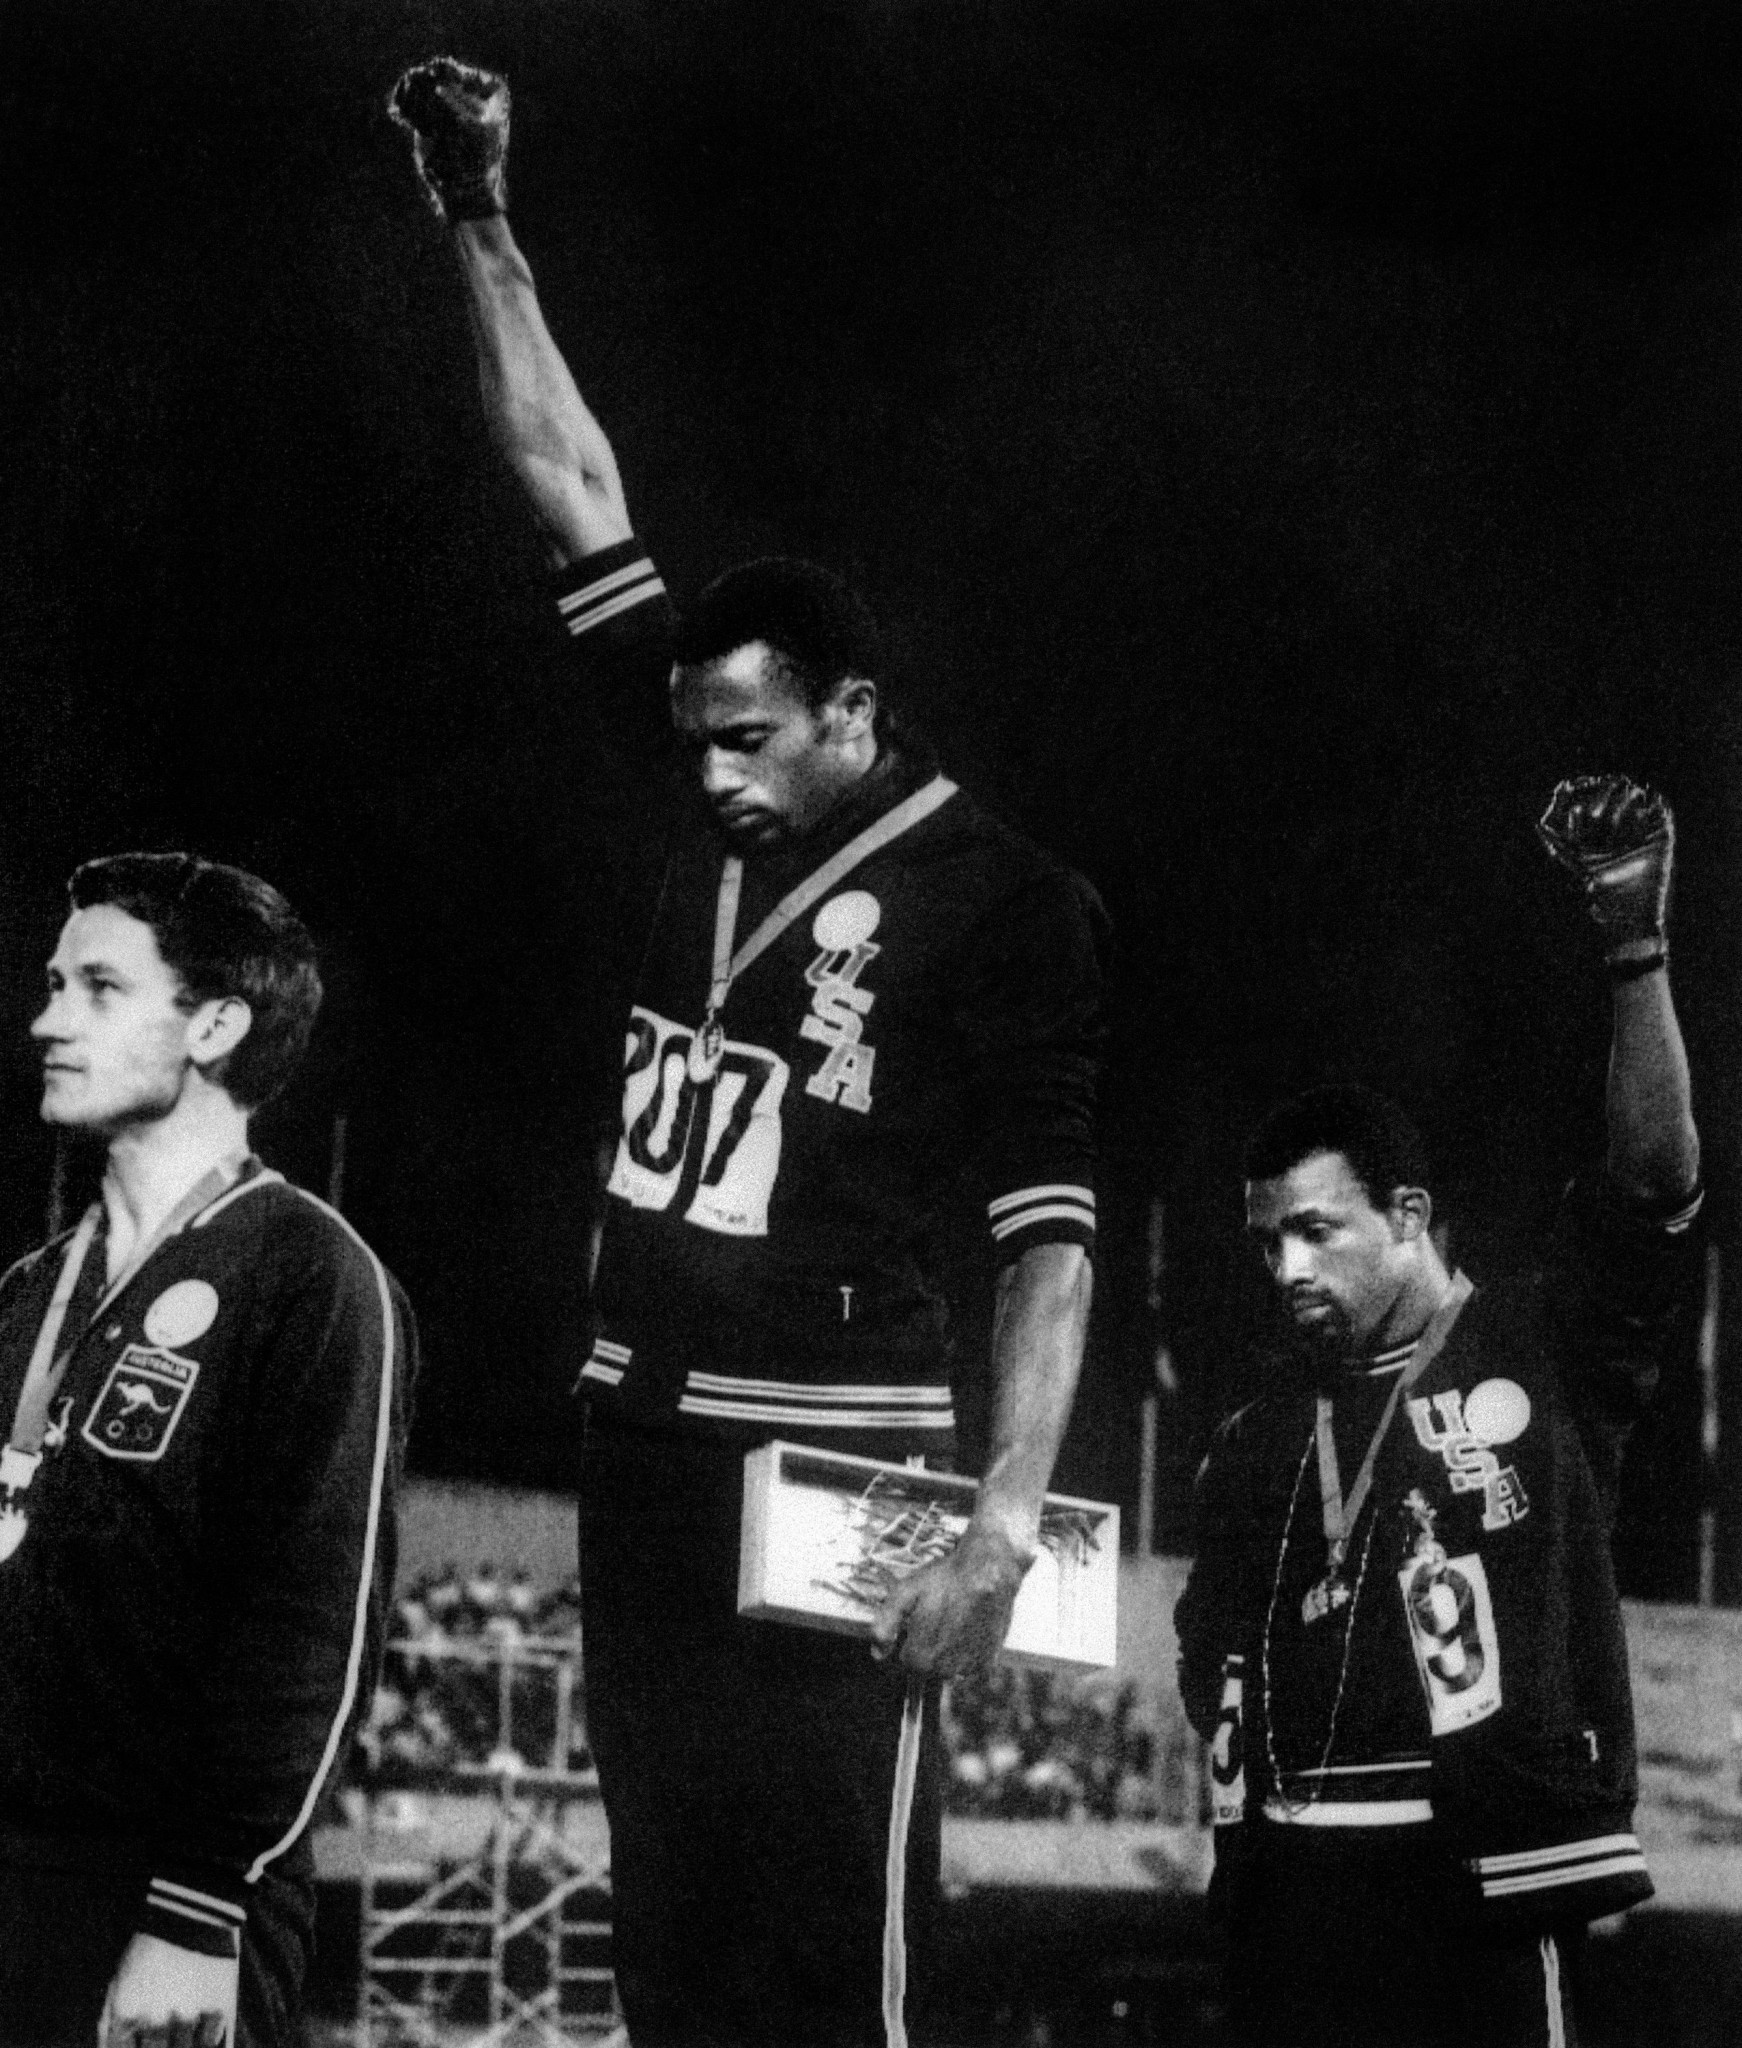 Black power sprinters to be inducted into USOPC Hall of Fame 50 years after iconic protest